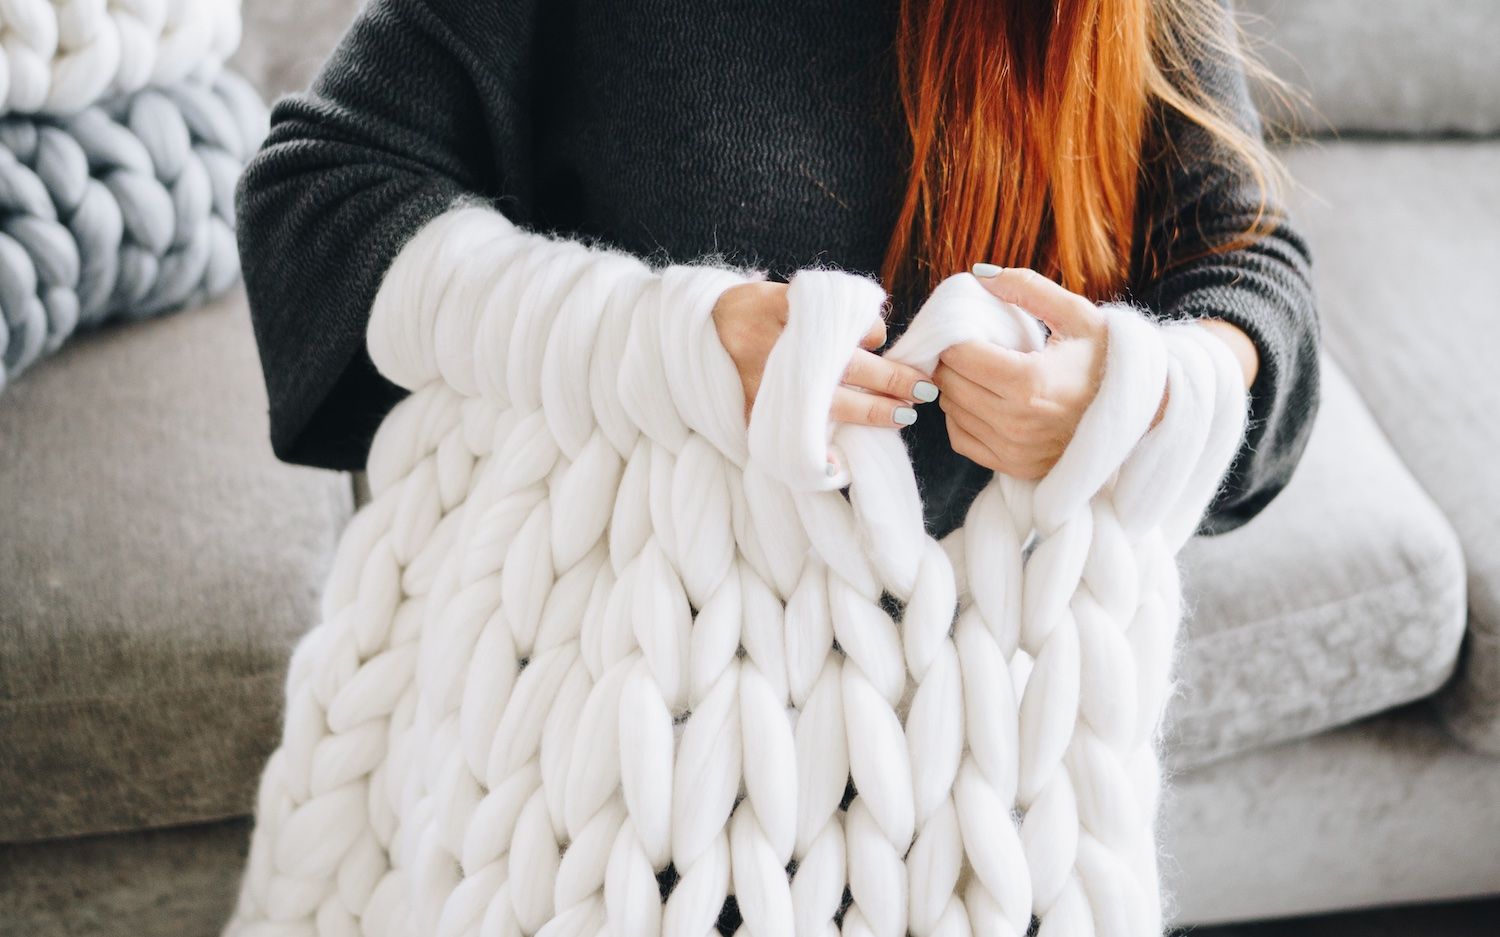 How To Make A Chunky Knit Blanket DIY Guide For Beginners WoolArtDesign